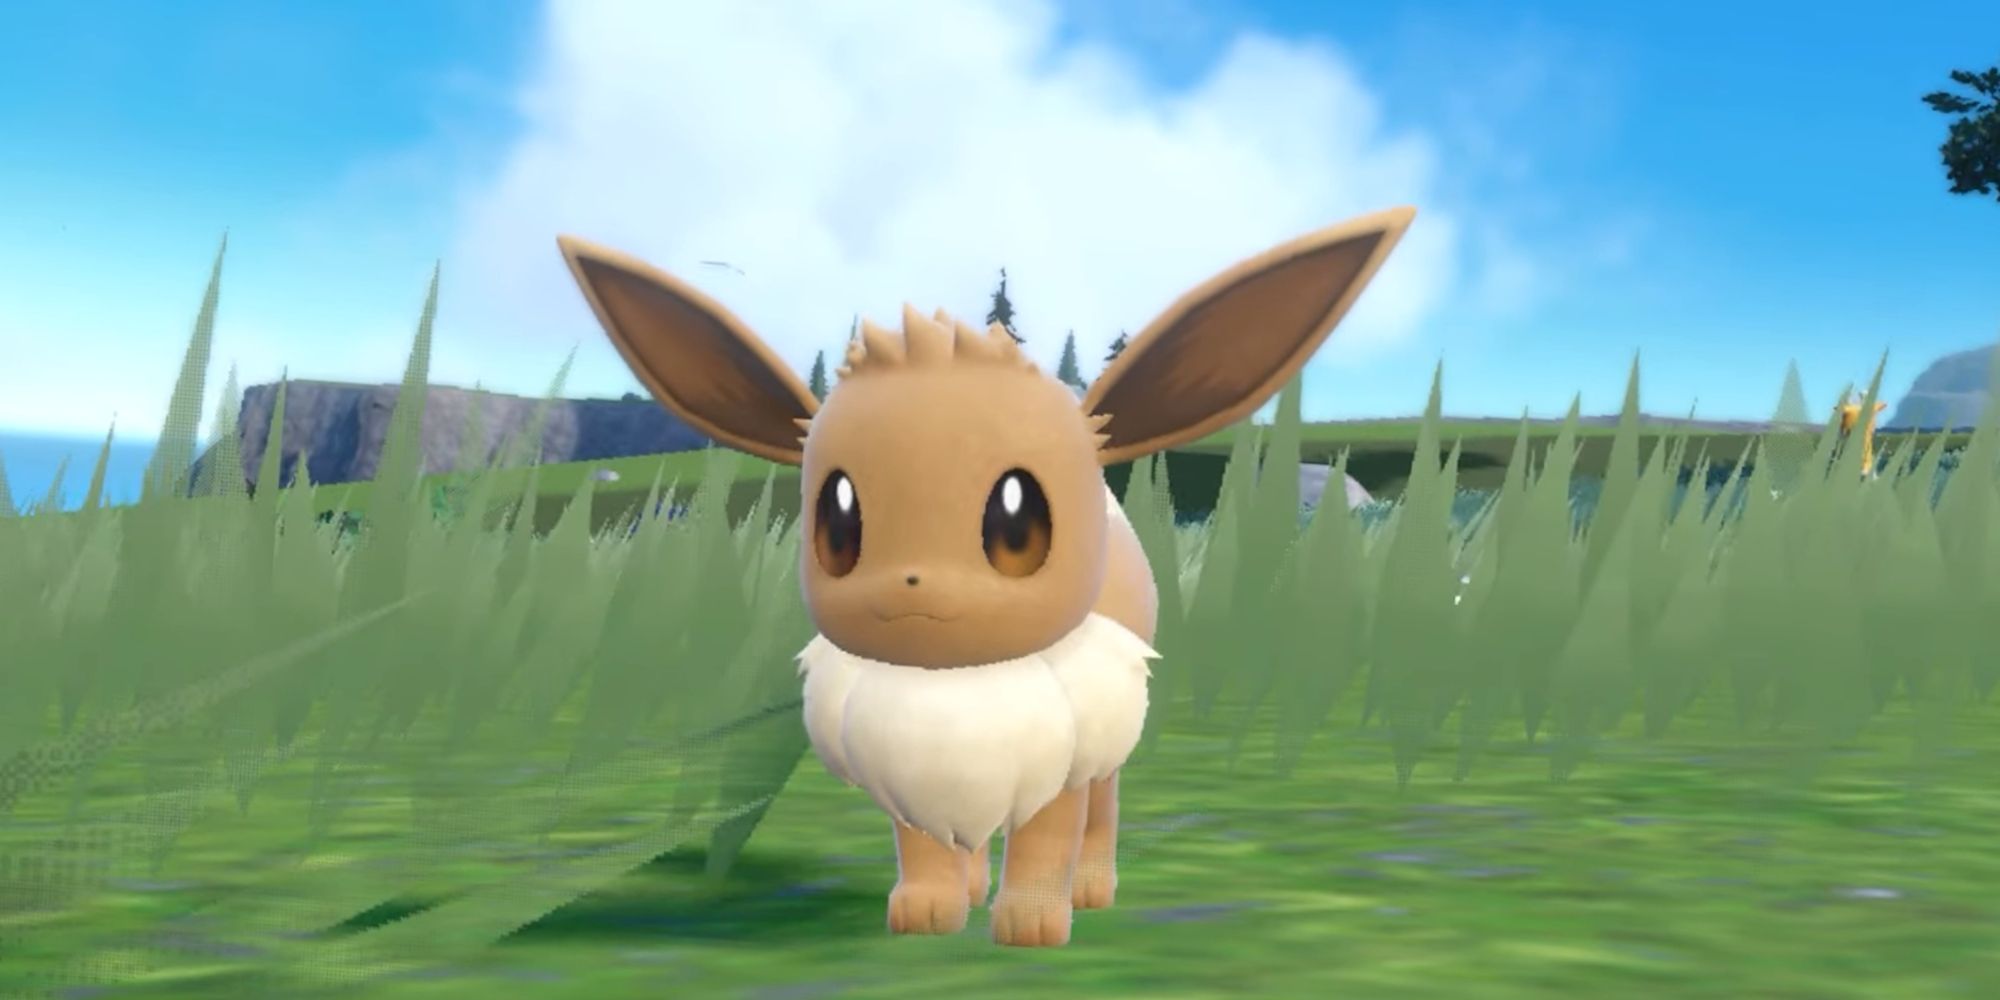 How To Find Eevee in Pokemon Scarlet And Violet